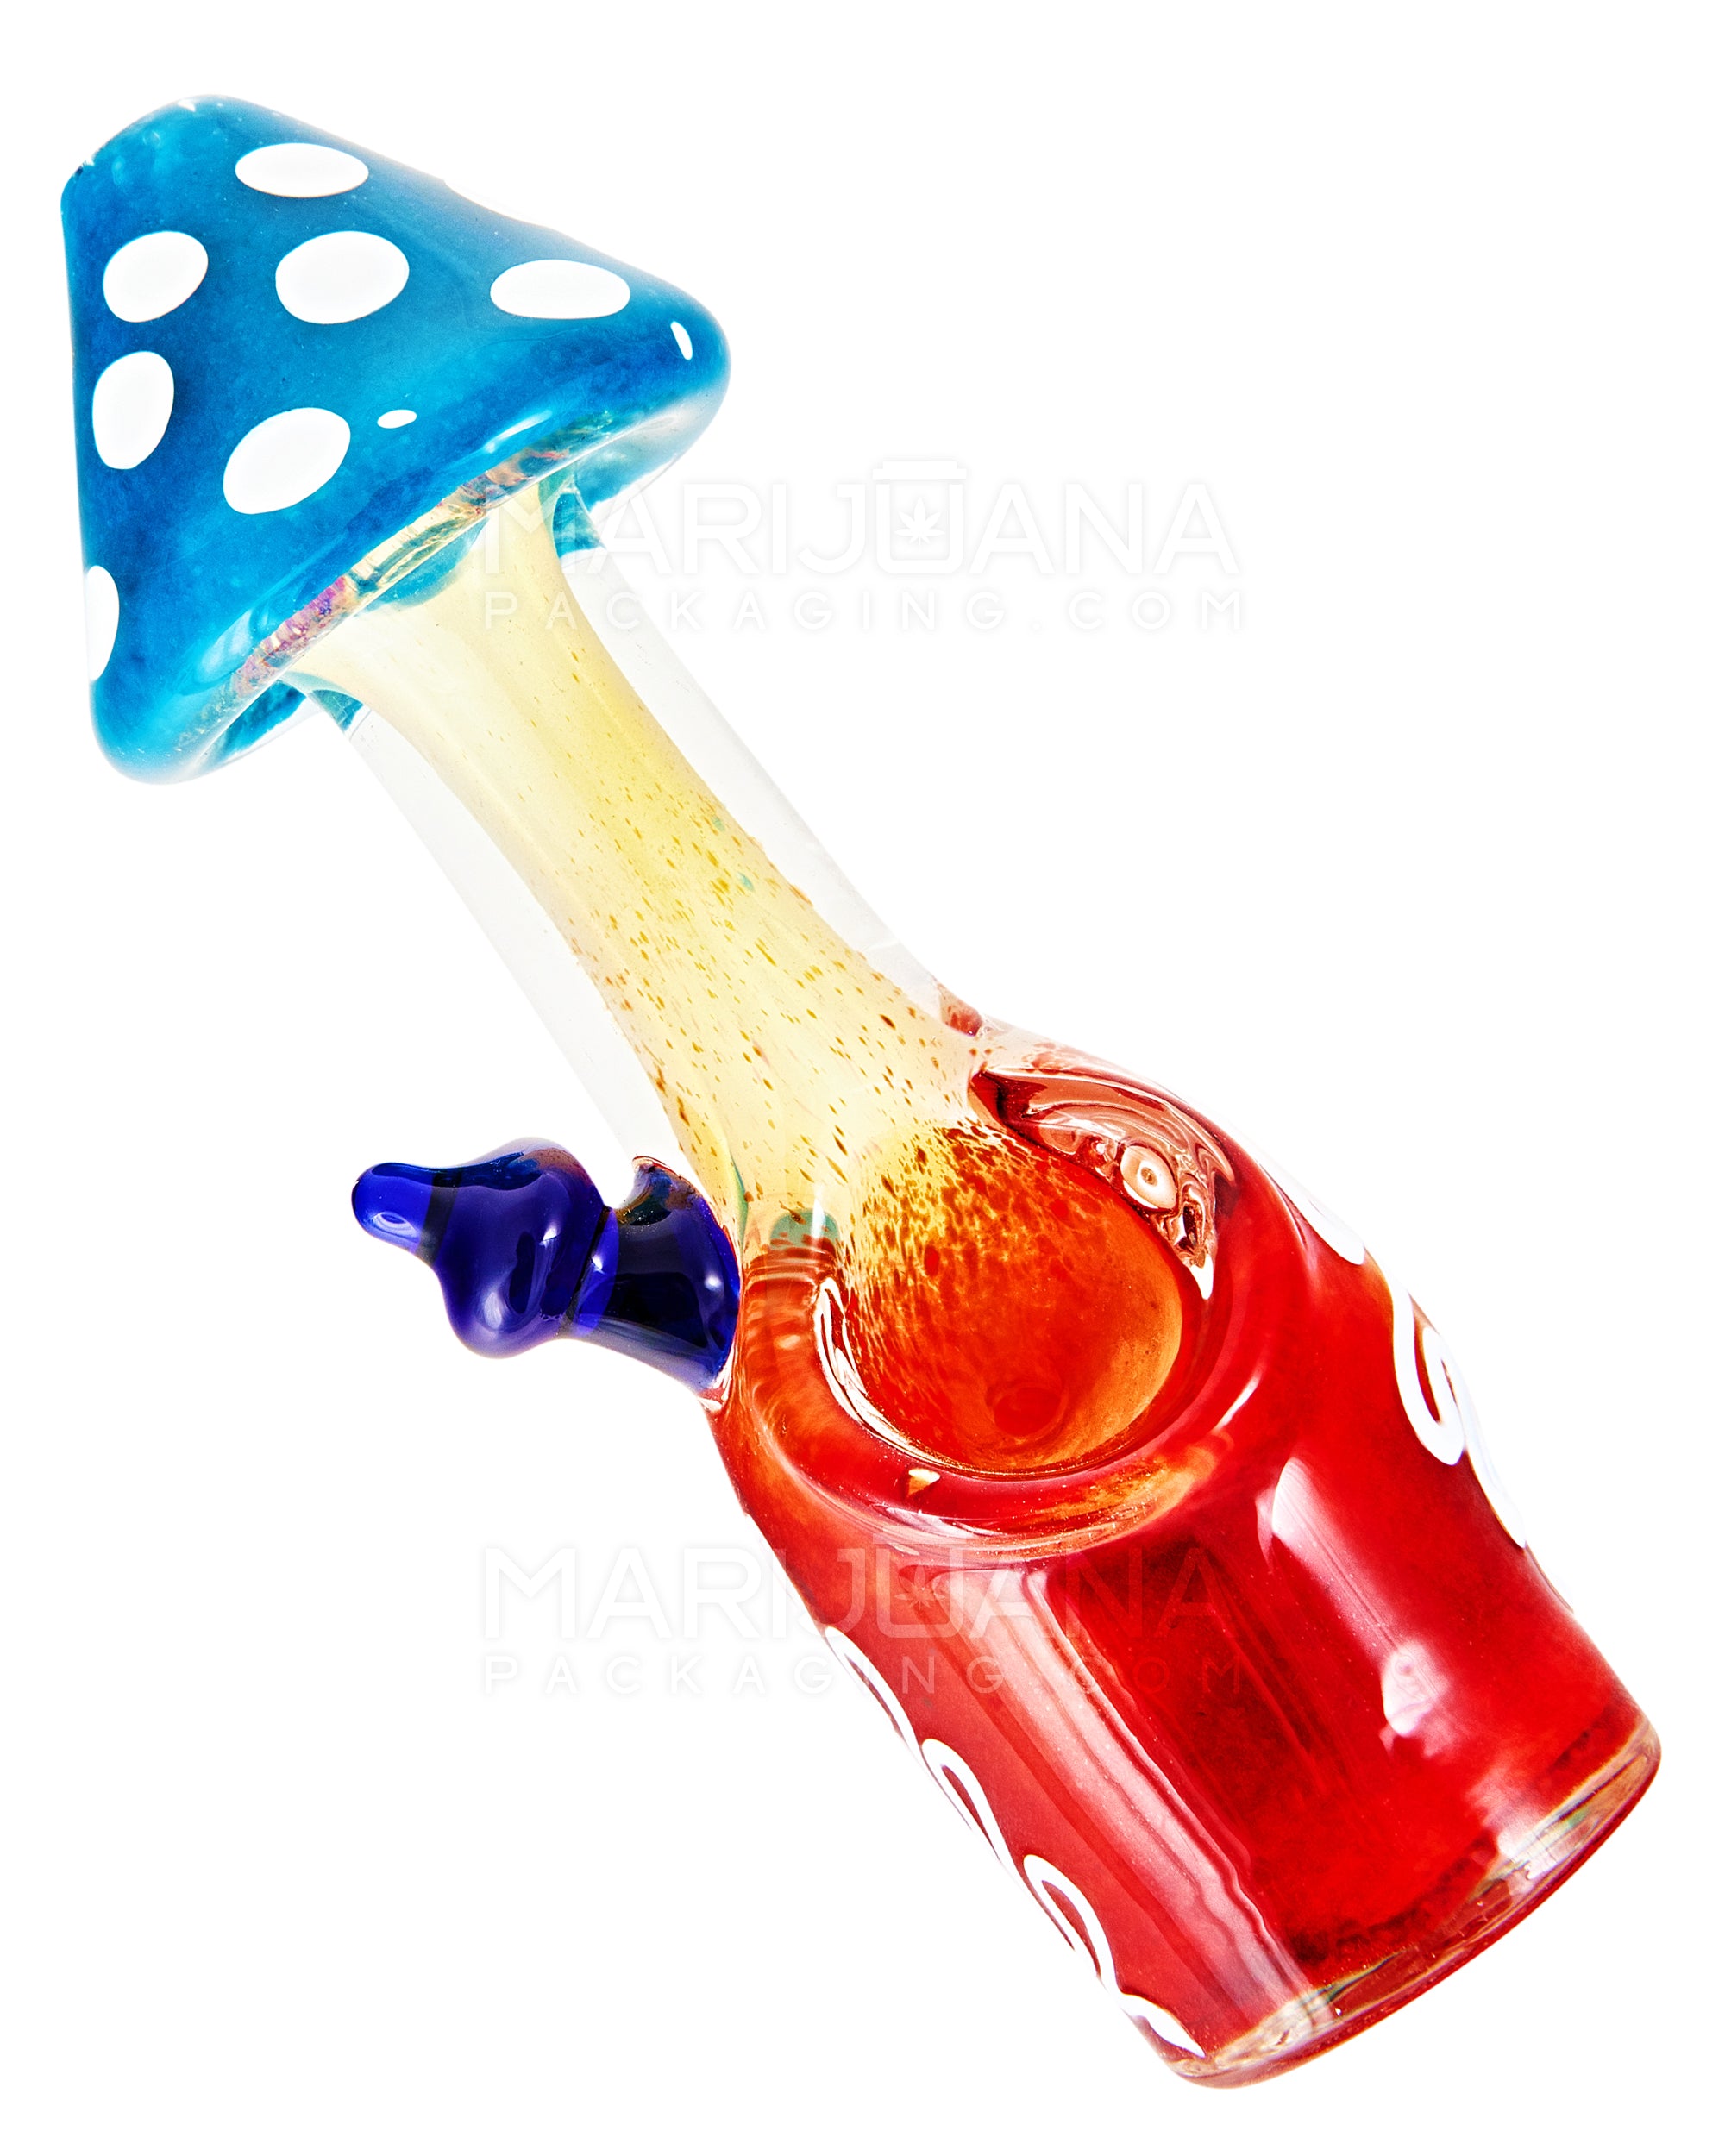 Frit & Gold Fumed Mushroom Hand Pipe w/ Swirls & Glass Handle | 5in Long - Glass - Mixed - 1